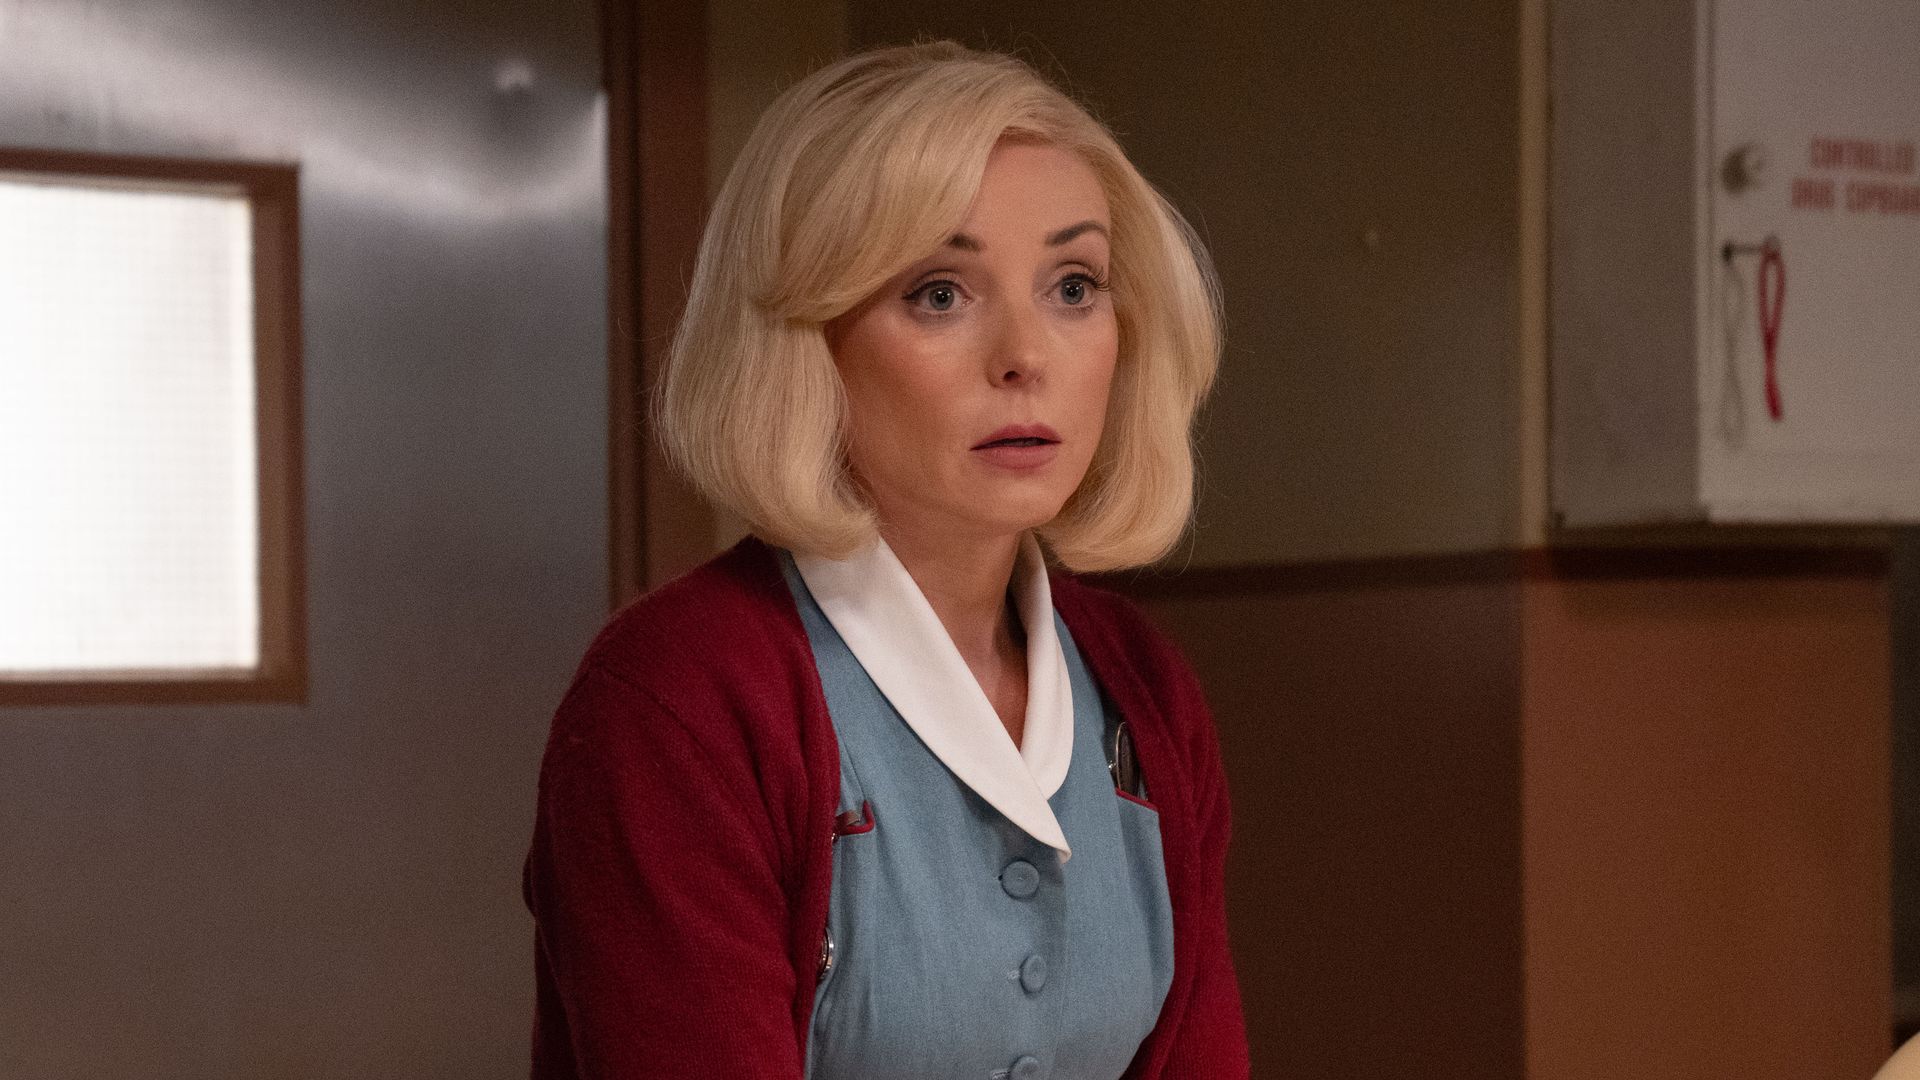 Helen George as Trixie in Call the Midwife